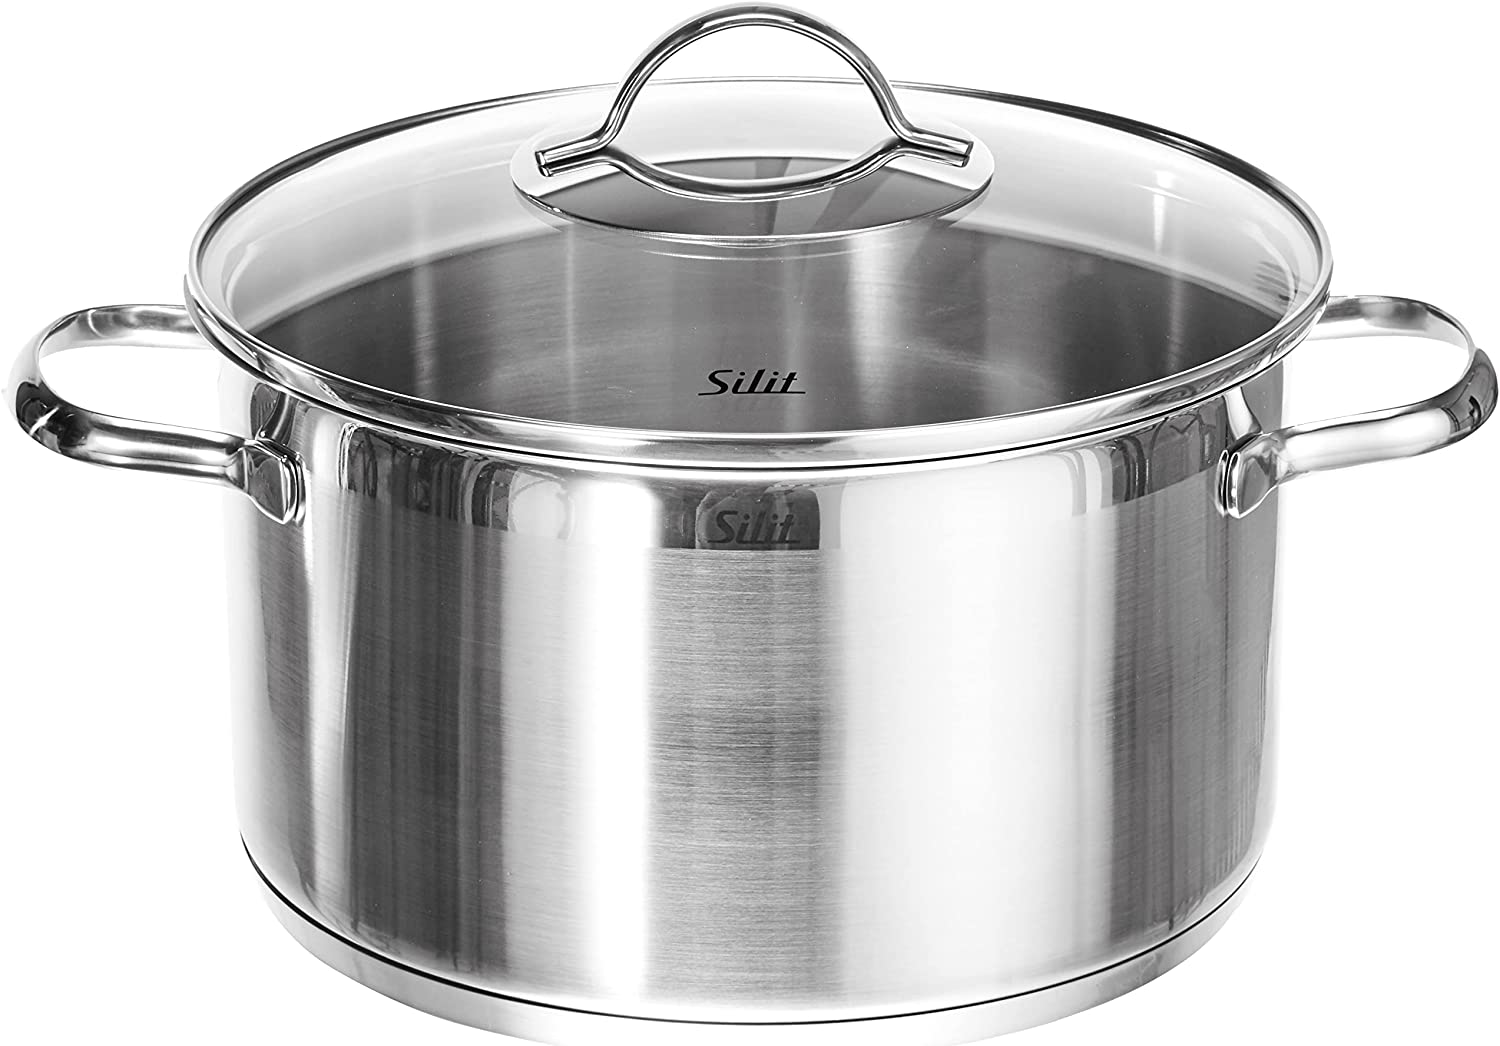 Silit Achat Cooking Pot Large 24 cm Glass Lid Meat Pot Induction 5.6 L Stainless Steel Partially Matted Uncoated Oven Safe